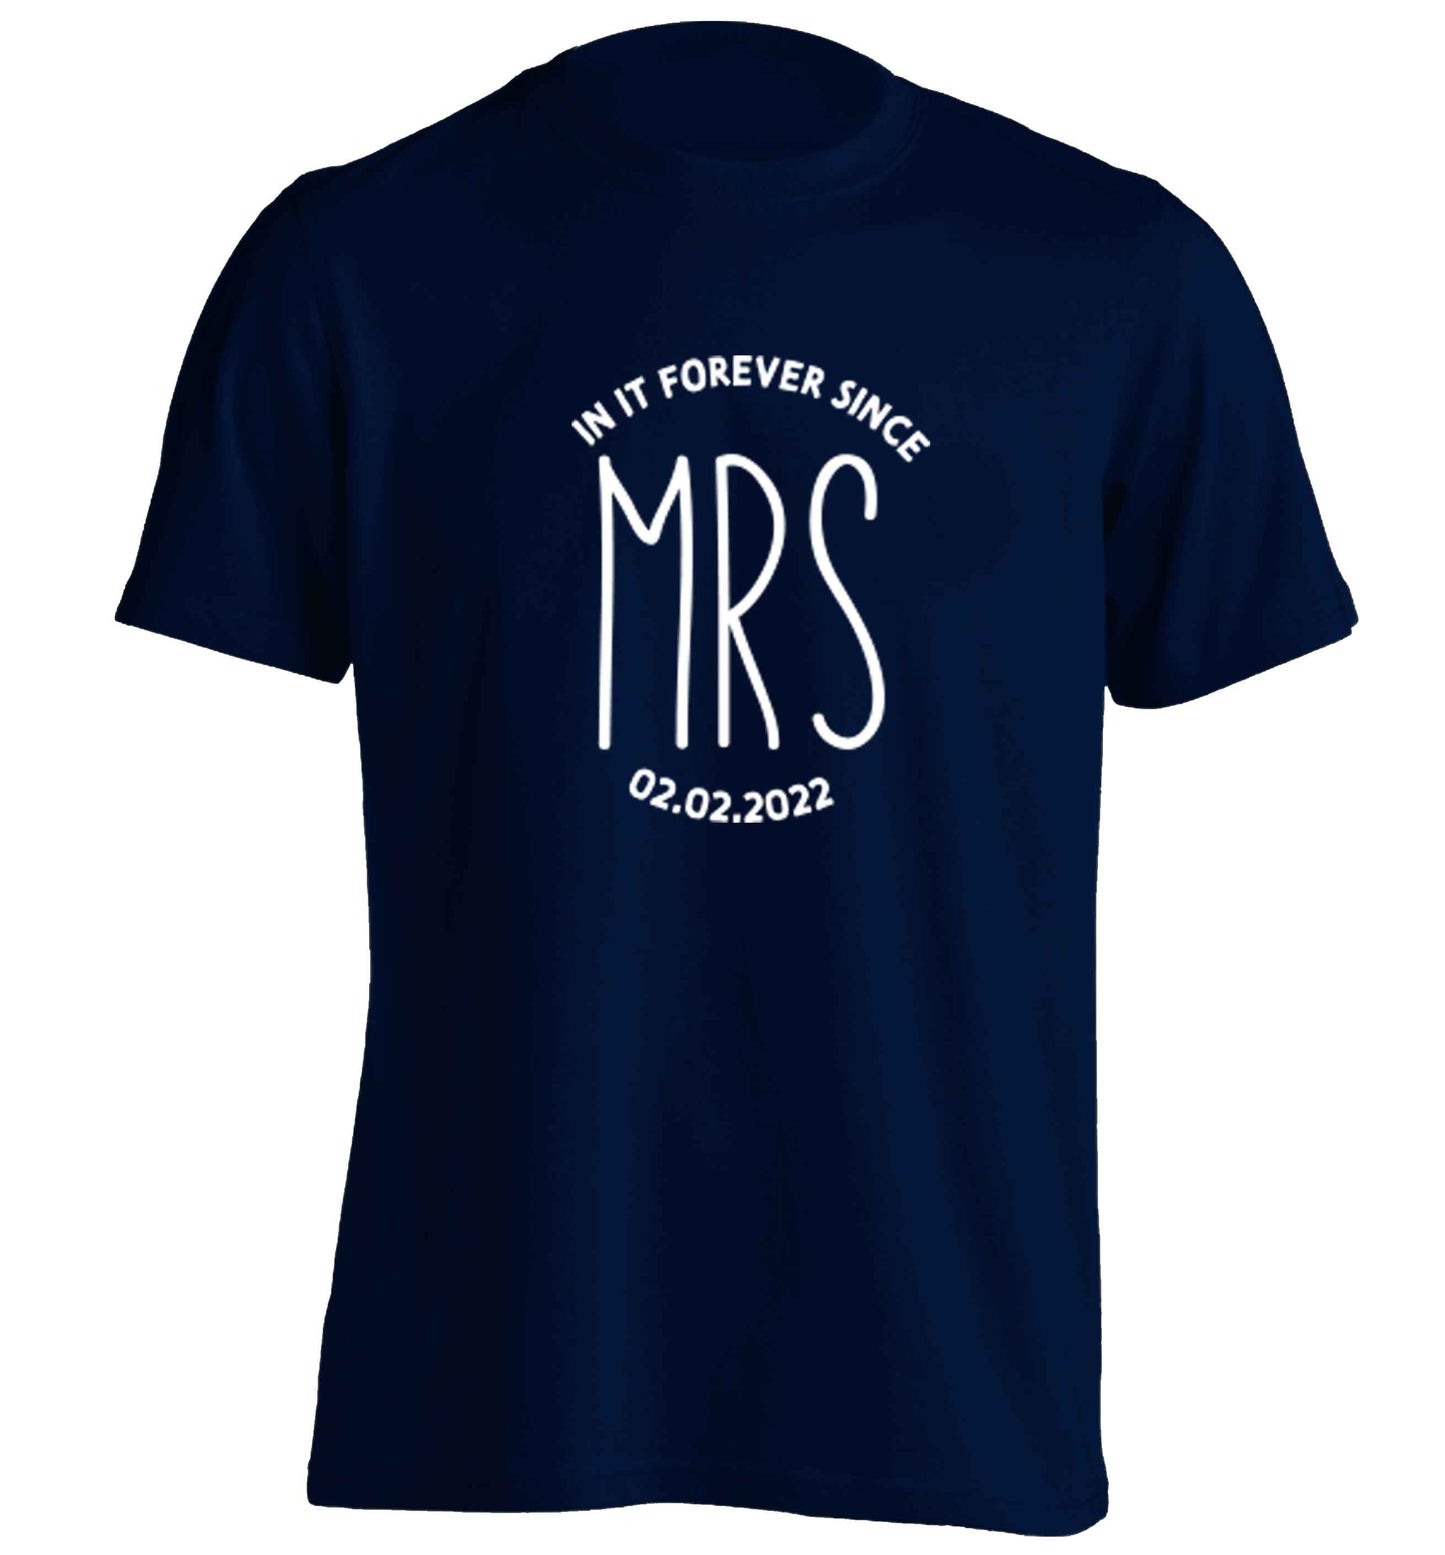 Funny matching gifts for him and her! Get matchy matchy, ideal for newlywed couples or a little valentines gift! adults unisex navy Tshirt 2XL